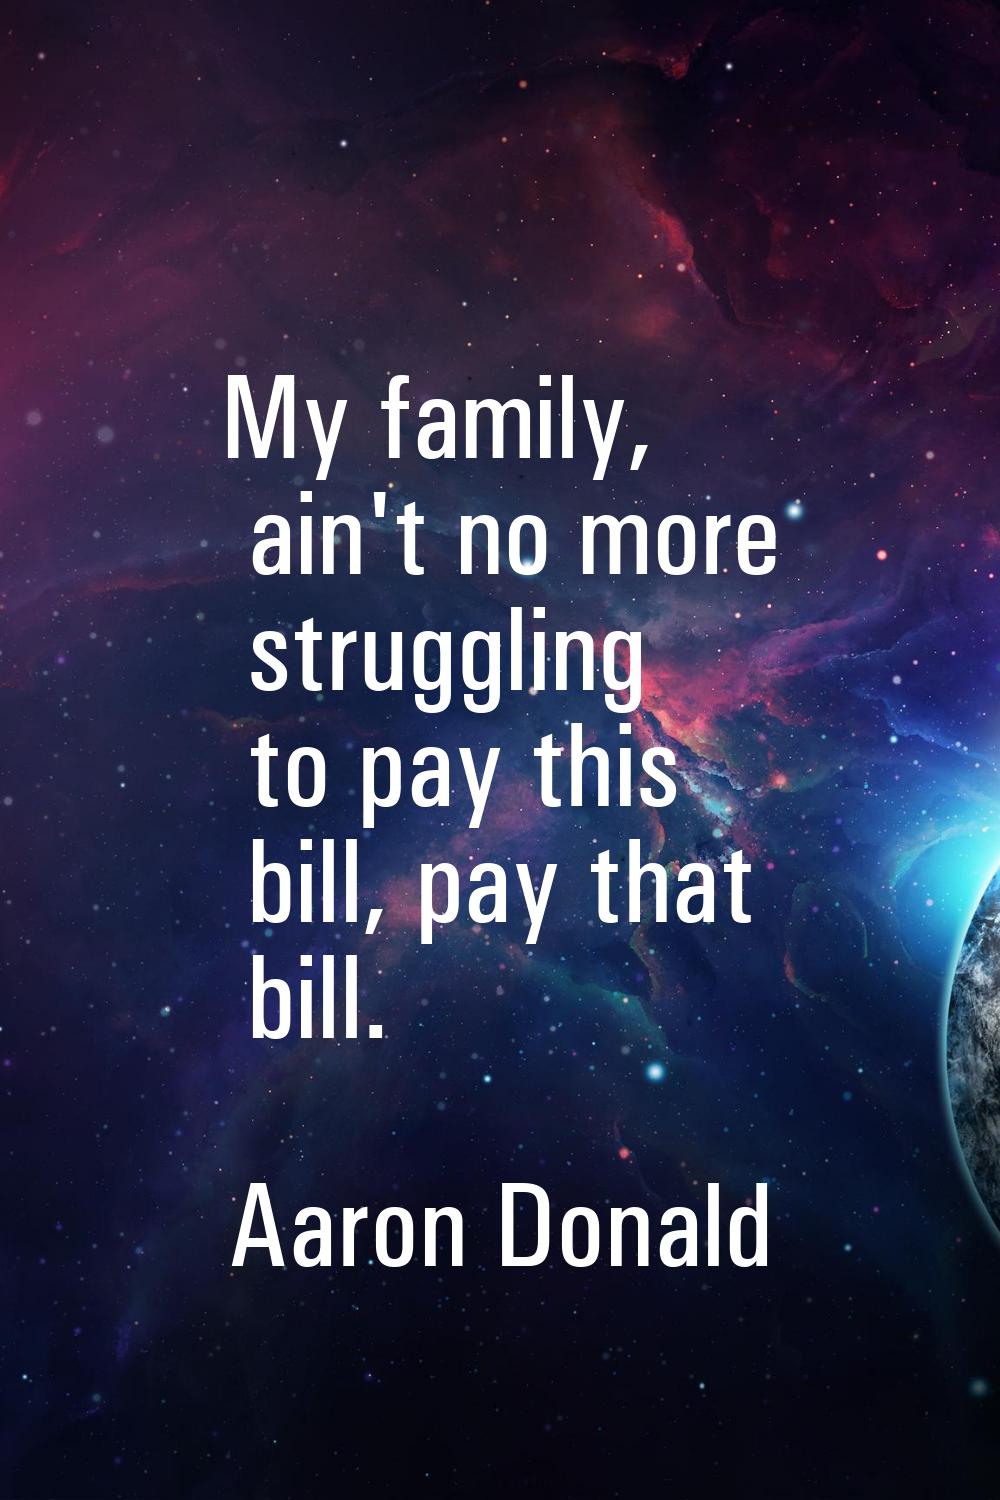 My family, ain't no more struggling to pay this bill, pay that bill.